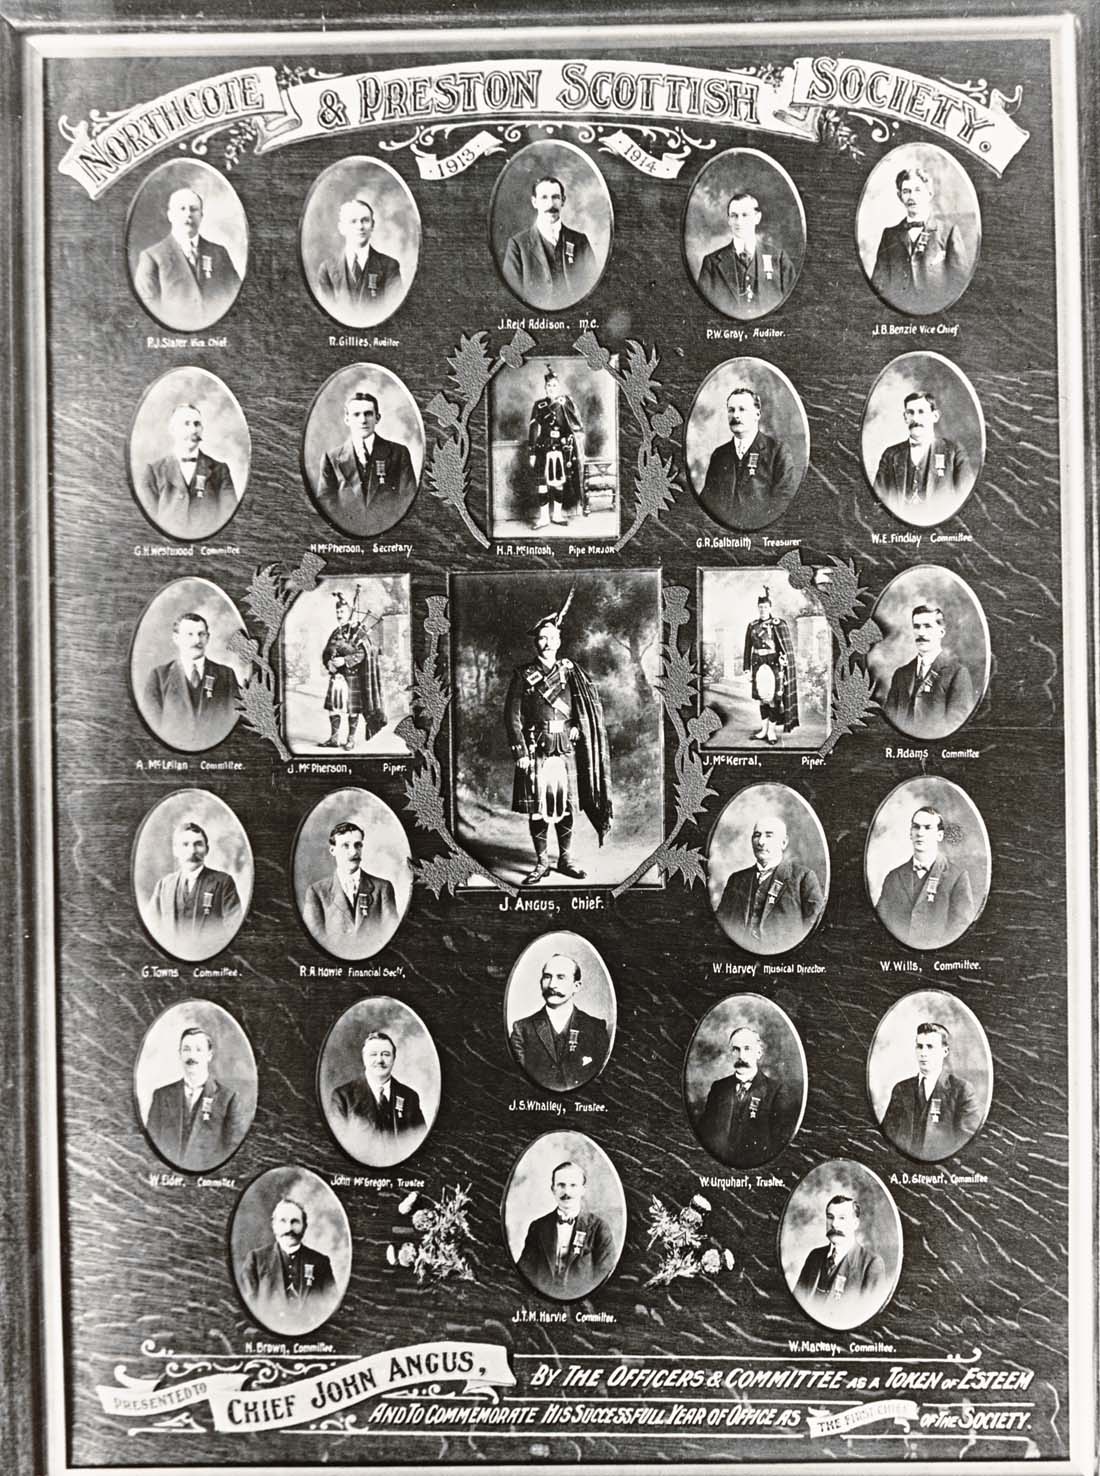 Image of Honour board for Northcote and Preston Scottish Society 1913/1914. [LHRN955]